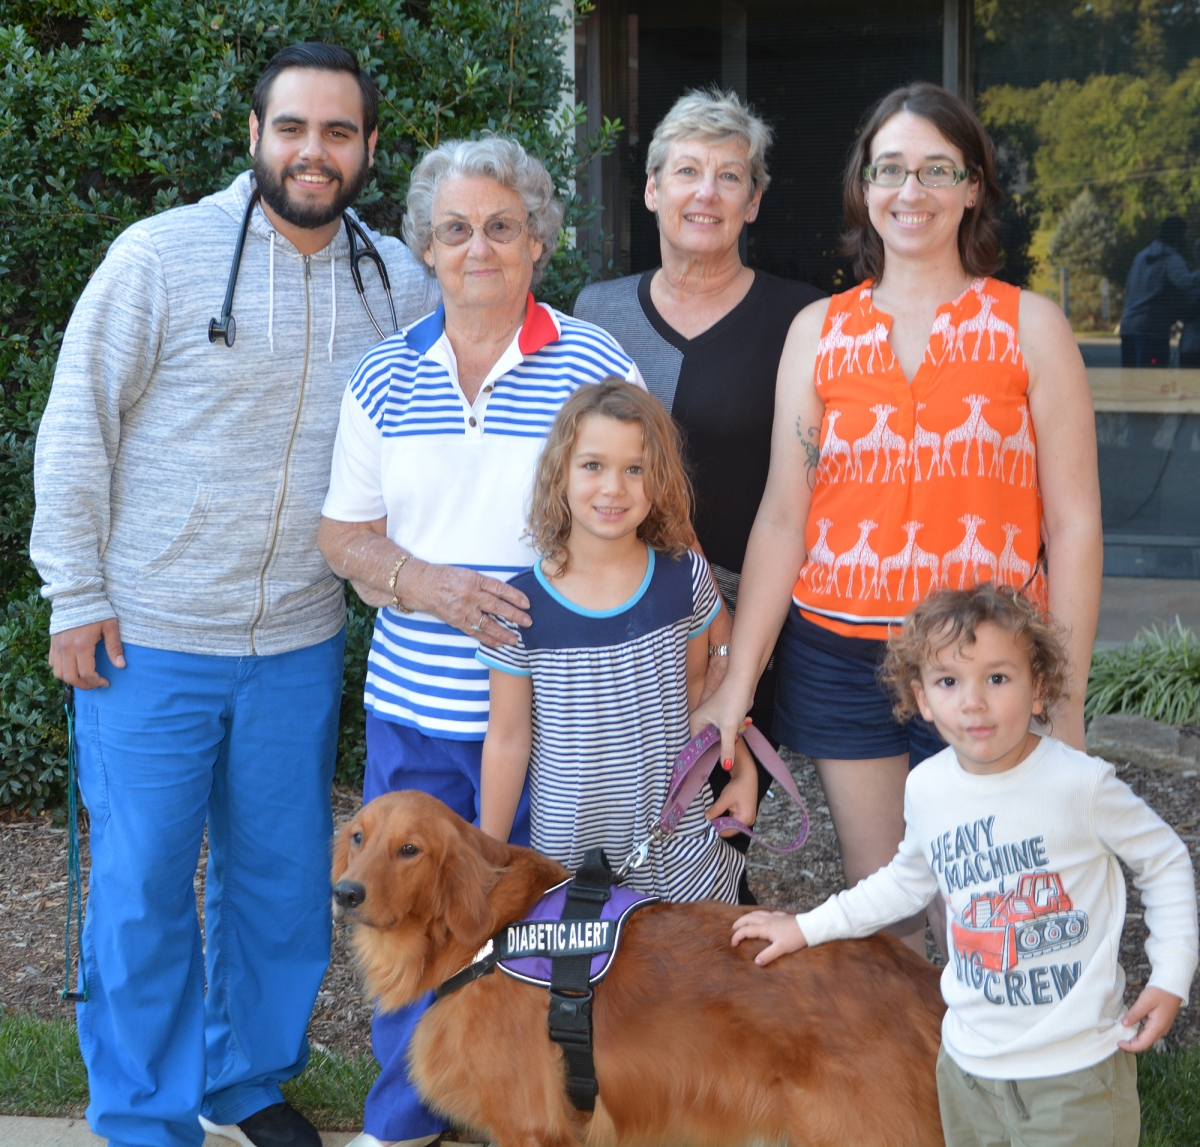 Nancy Klutz and family pictured outside with scholarship recipient Evan Cann.